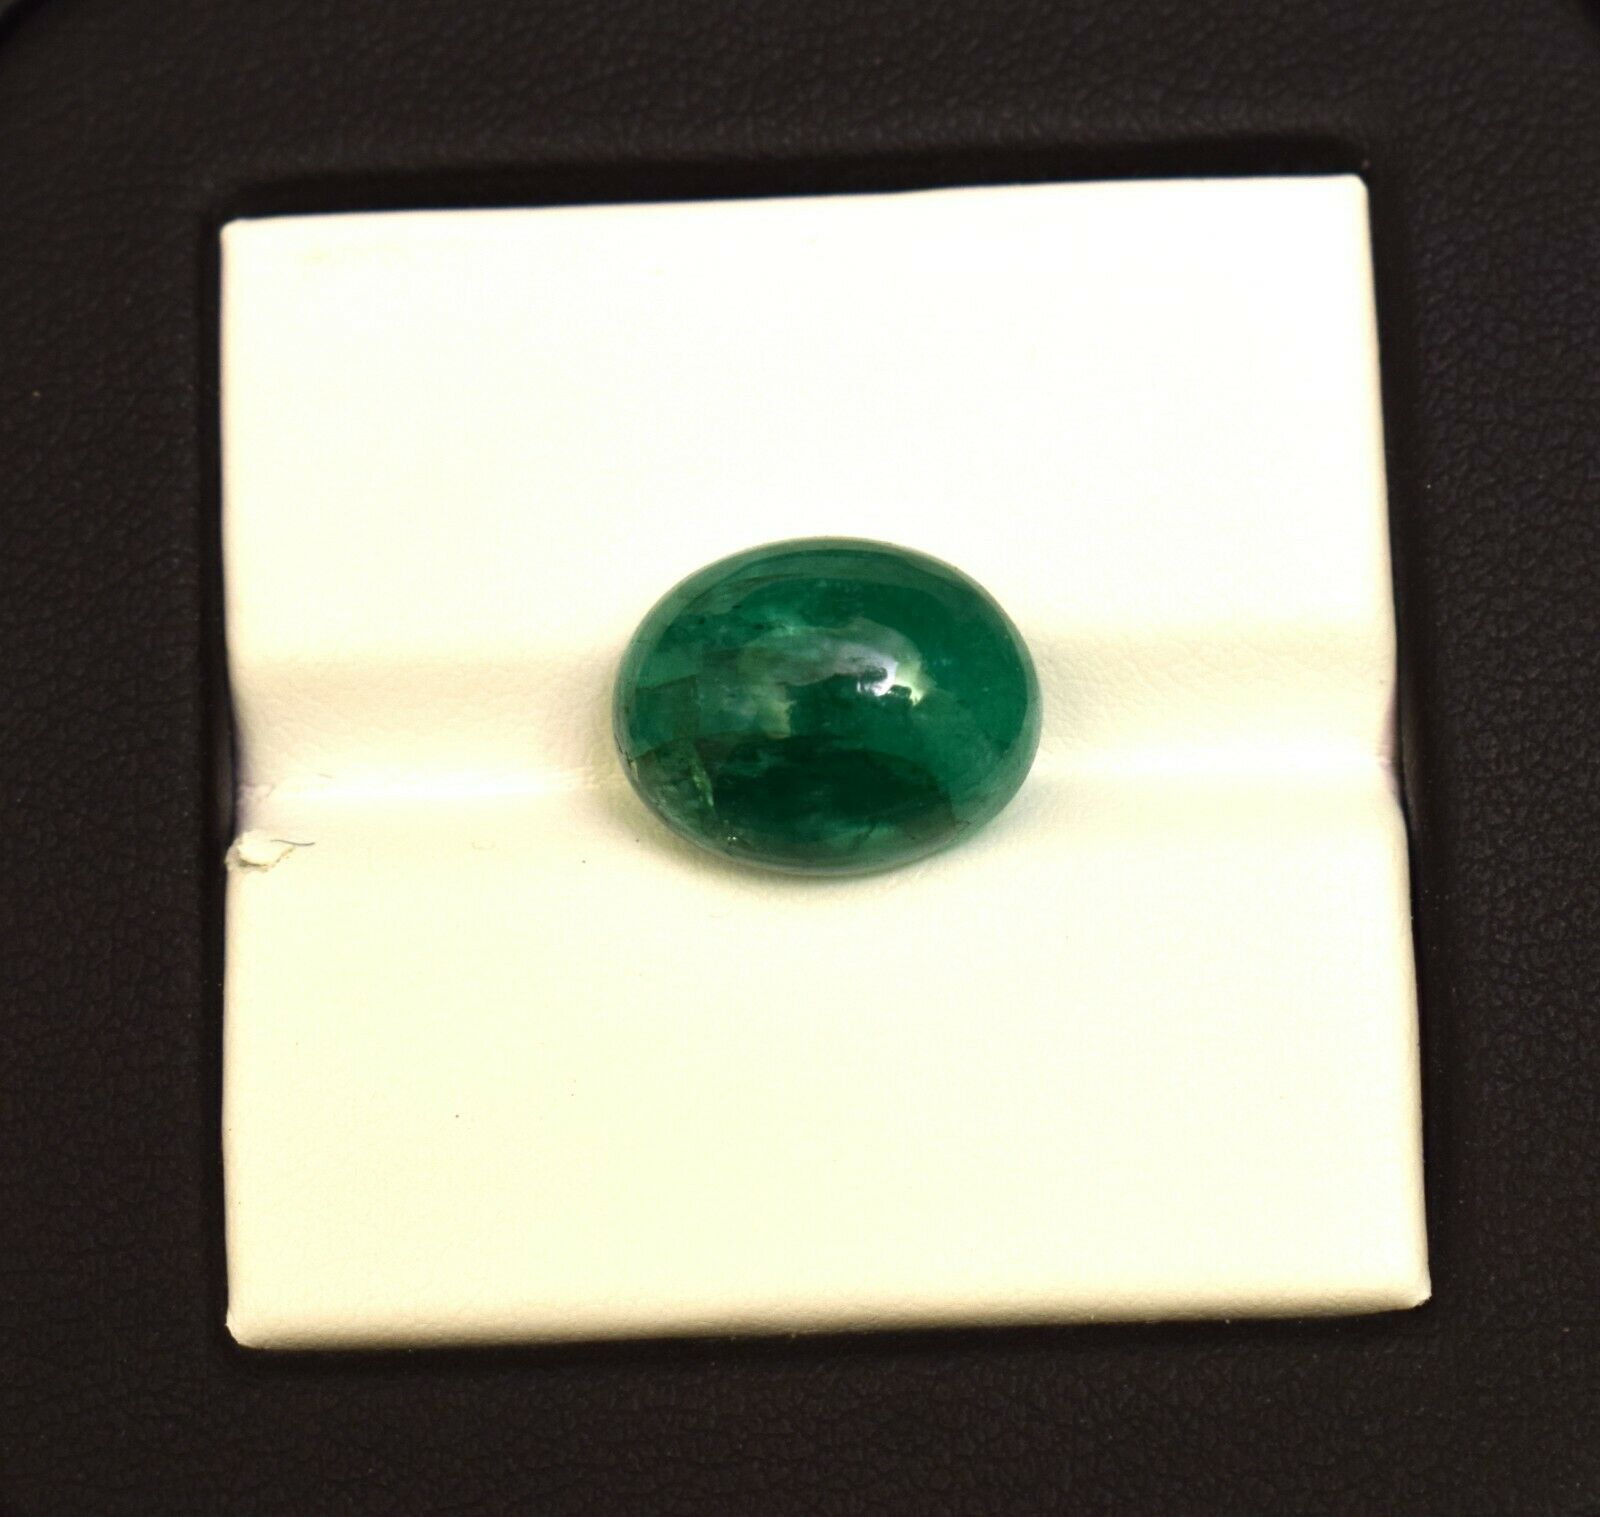 Natural Emerald Loose Gemstone Cabochon 7.05 Ct Oval From Zambia For Jewelry